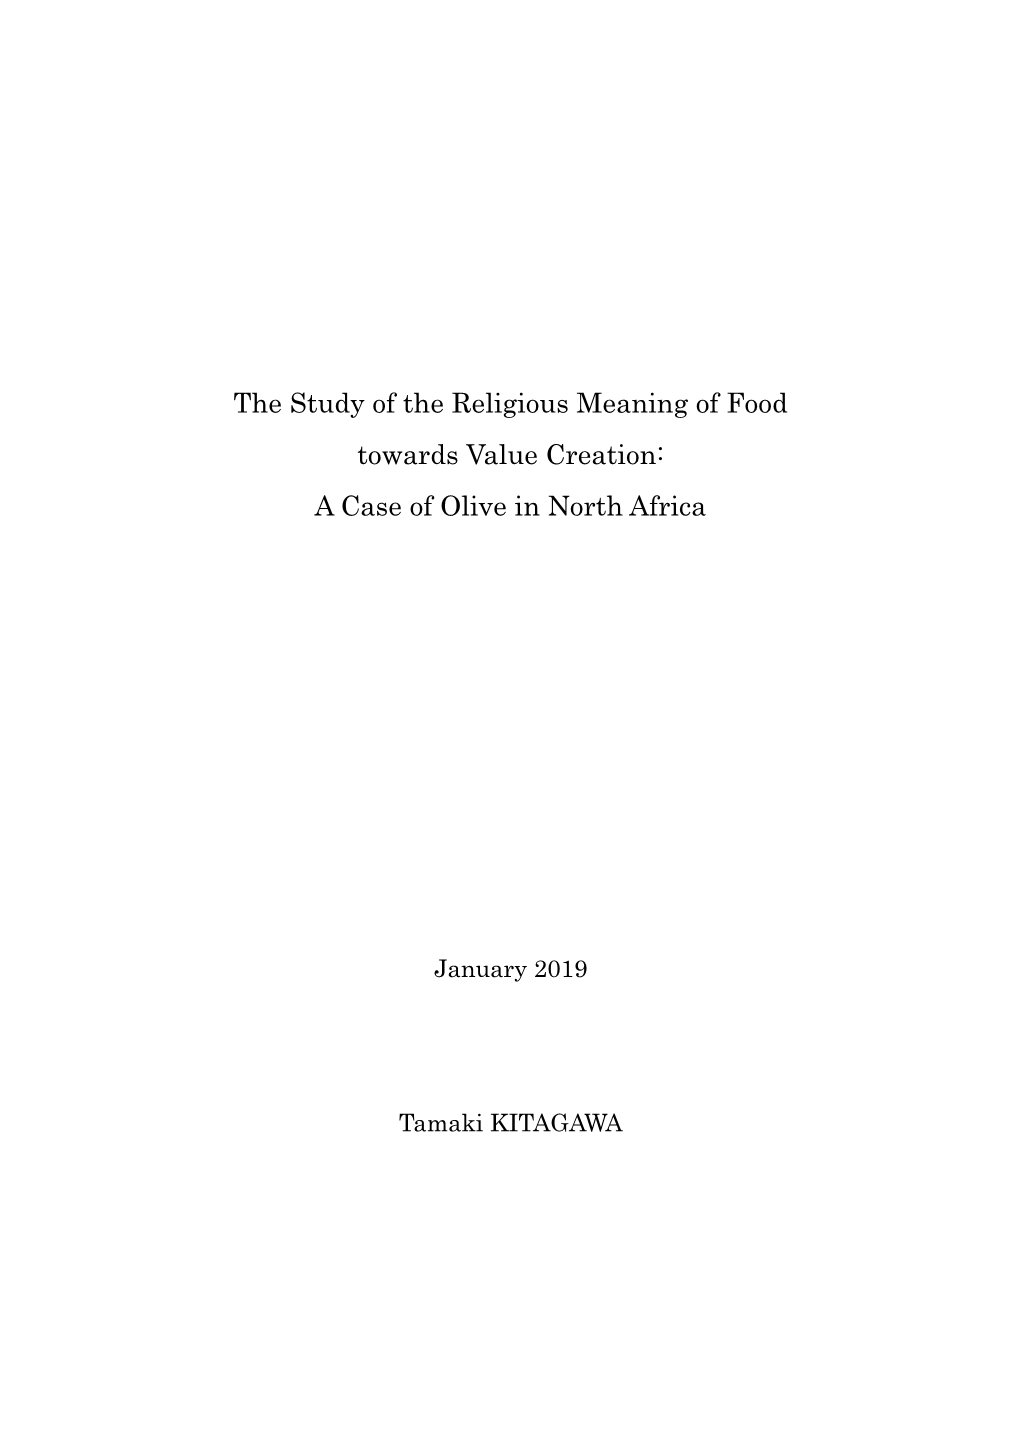 The Study of the Religious Meaning of Food Towards Value Creation: a Case of Olive in North Africa